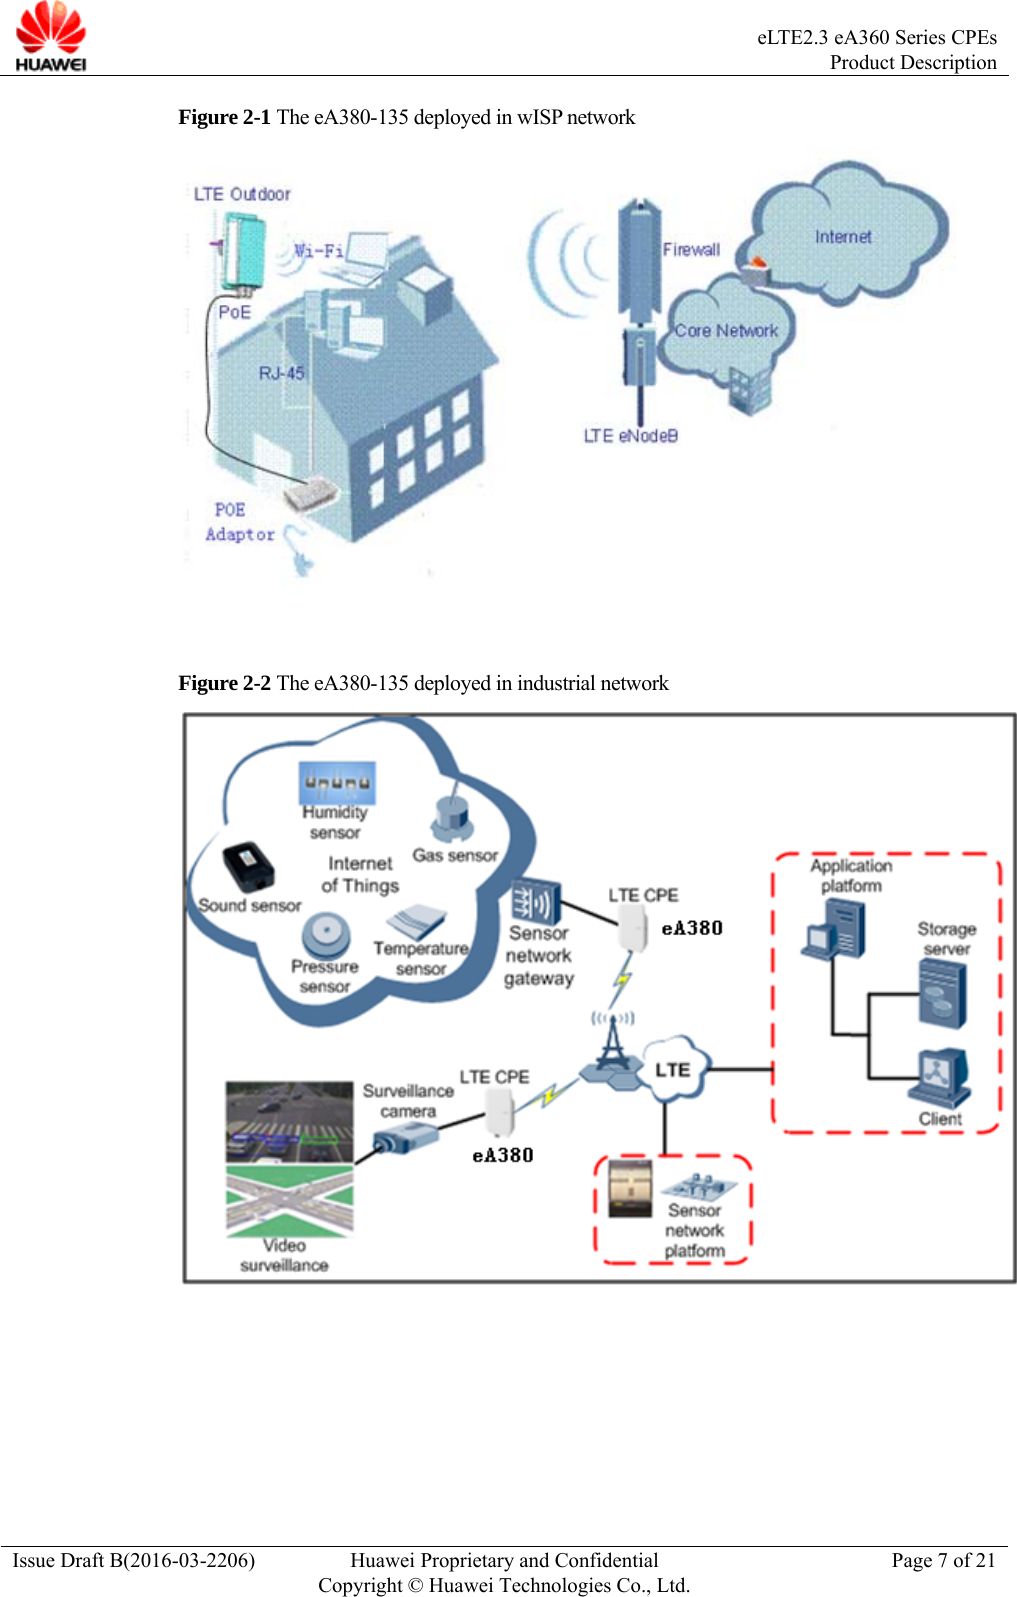  eLTE2.3 eA360 Series CPEsProduct Description Issue Draft B(2016-03-2206)  Huawei Proprietary and Confidential Copyright © Huawei Technologies Co., Ltd.Page 7 of 21 Figure 2-1 The eA380-135 deployed in wISP network   Figure 2-2 The eA380-135 deployed in industrial network   